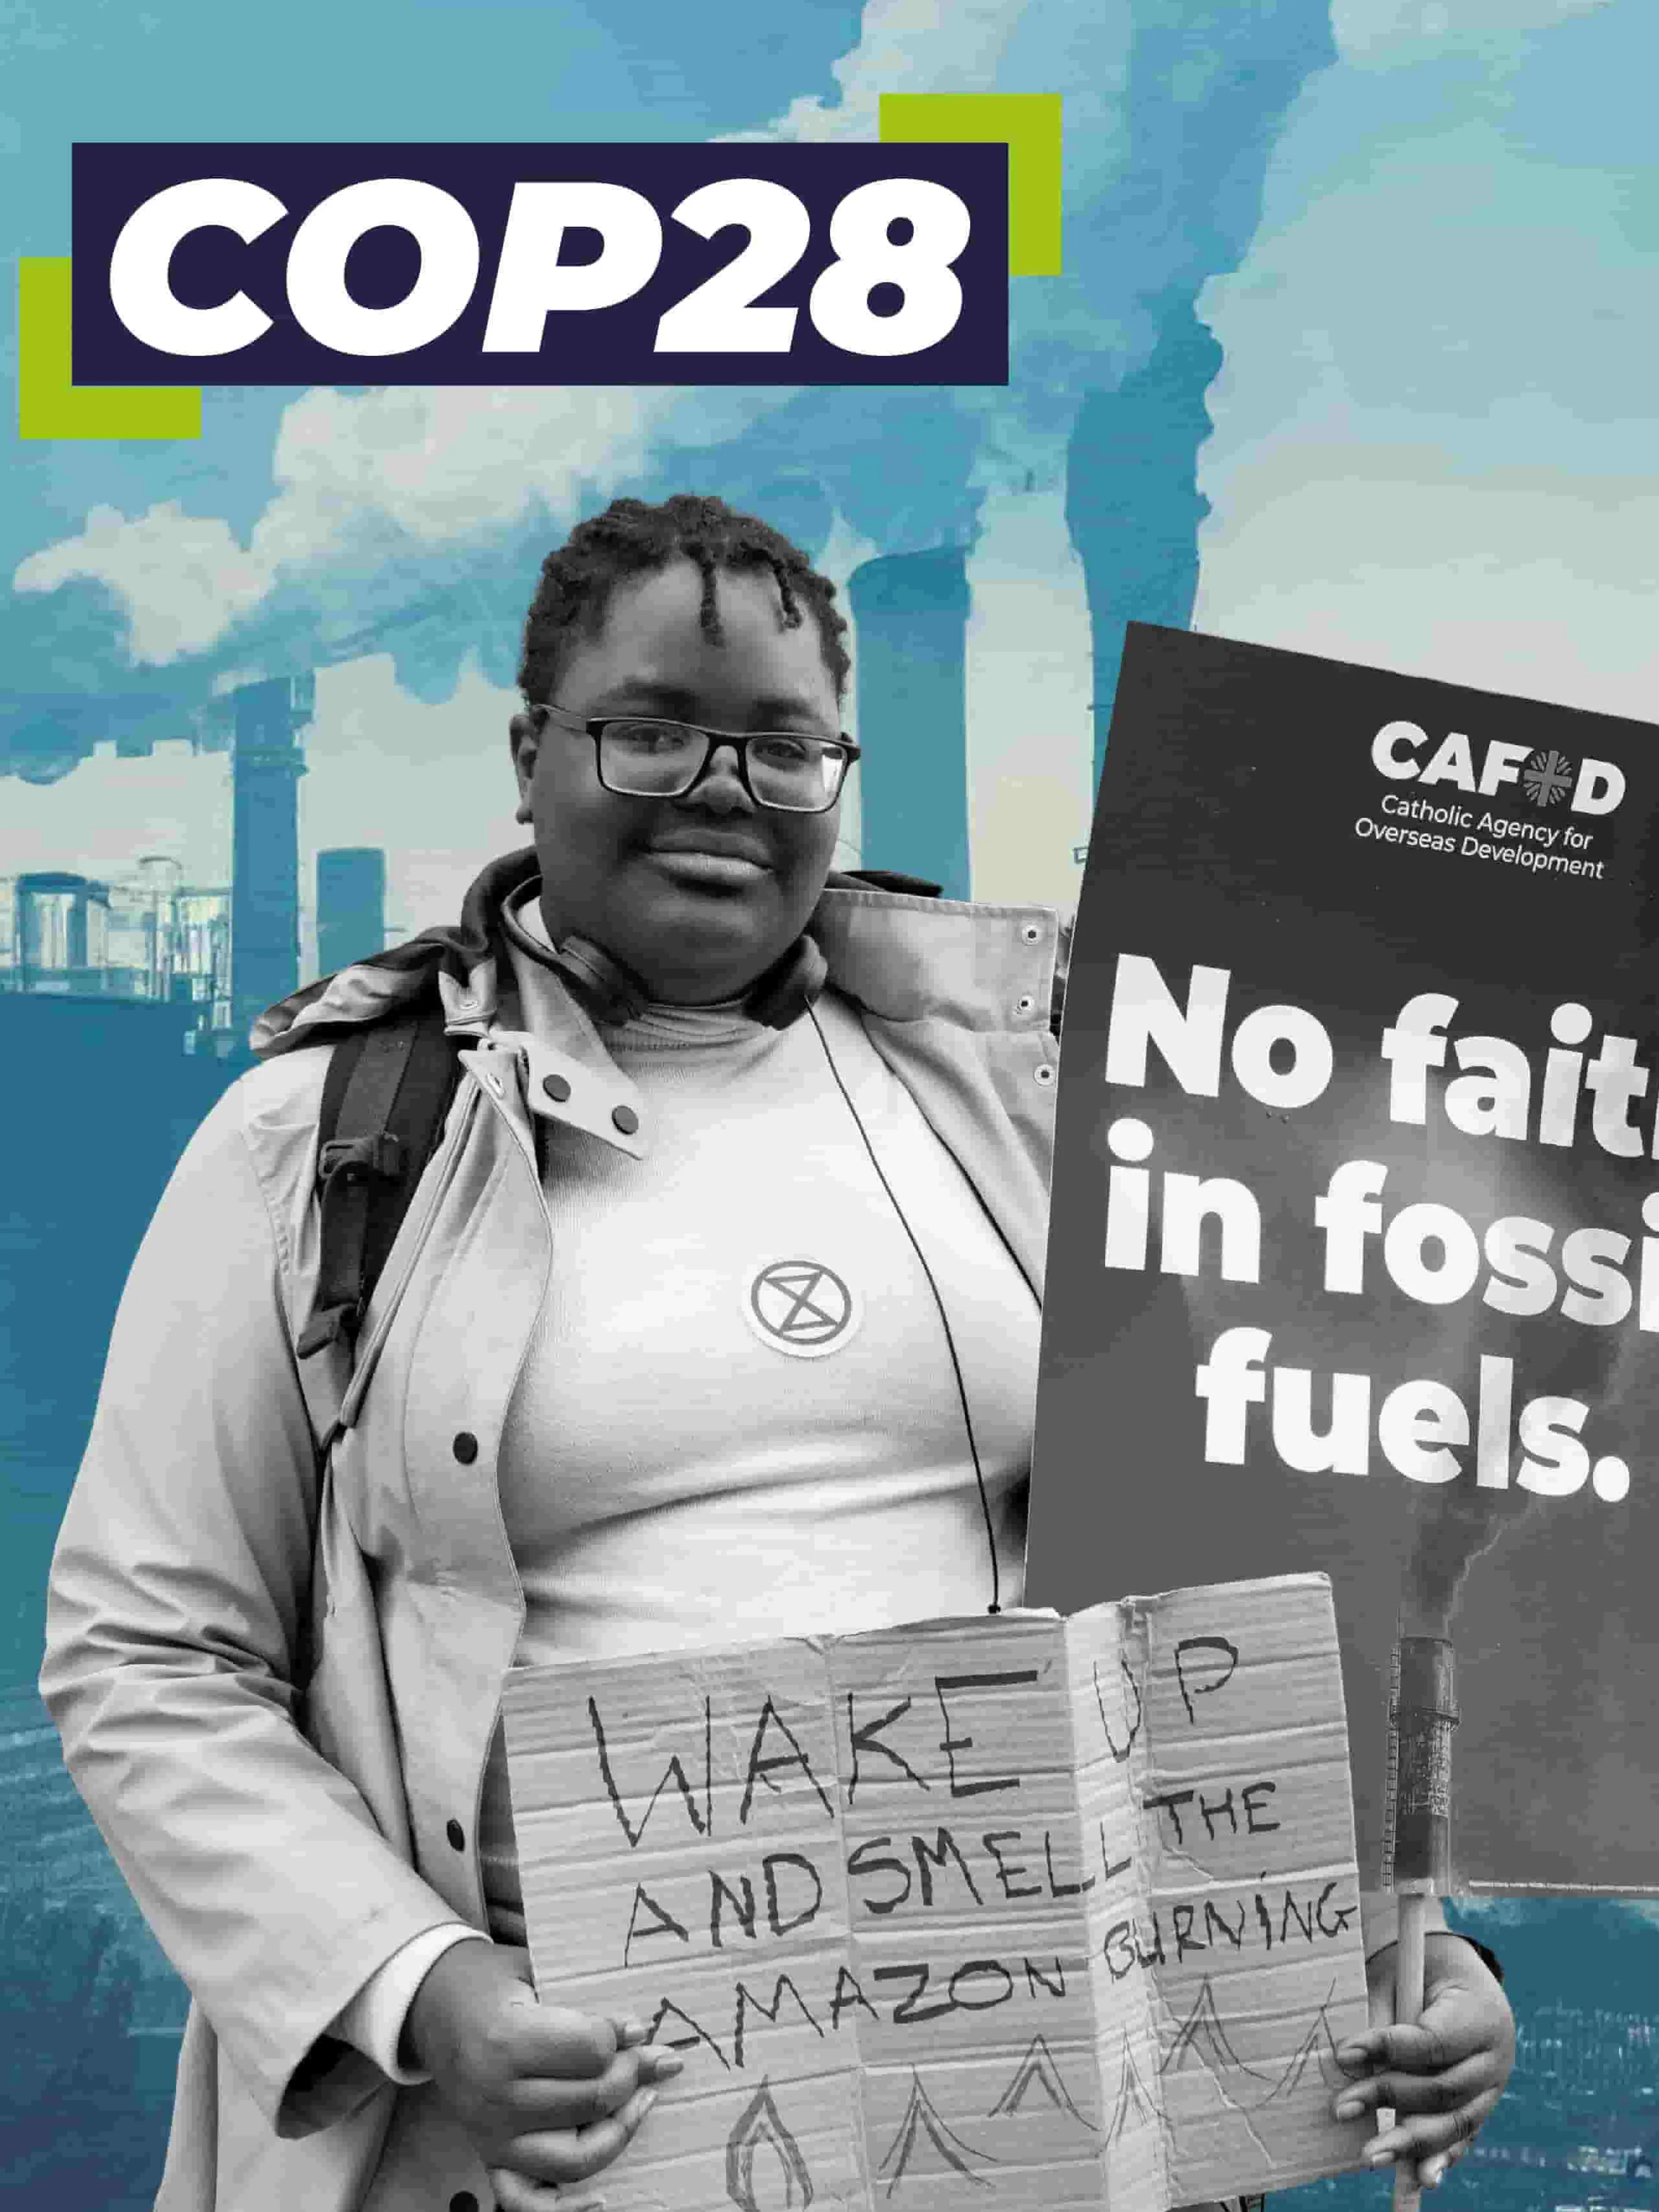 COP28 agreement on fossil fuels